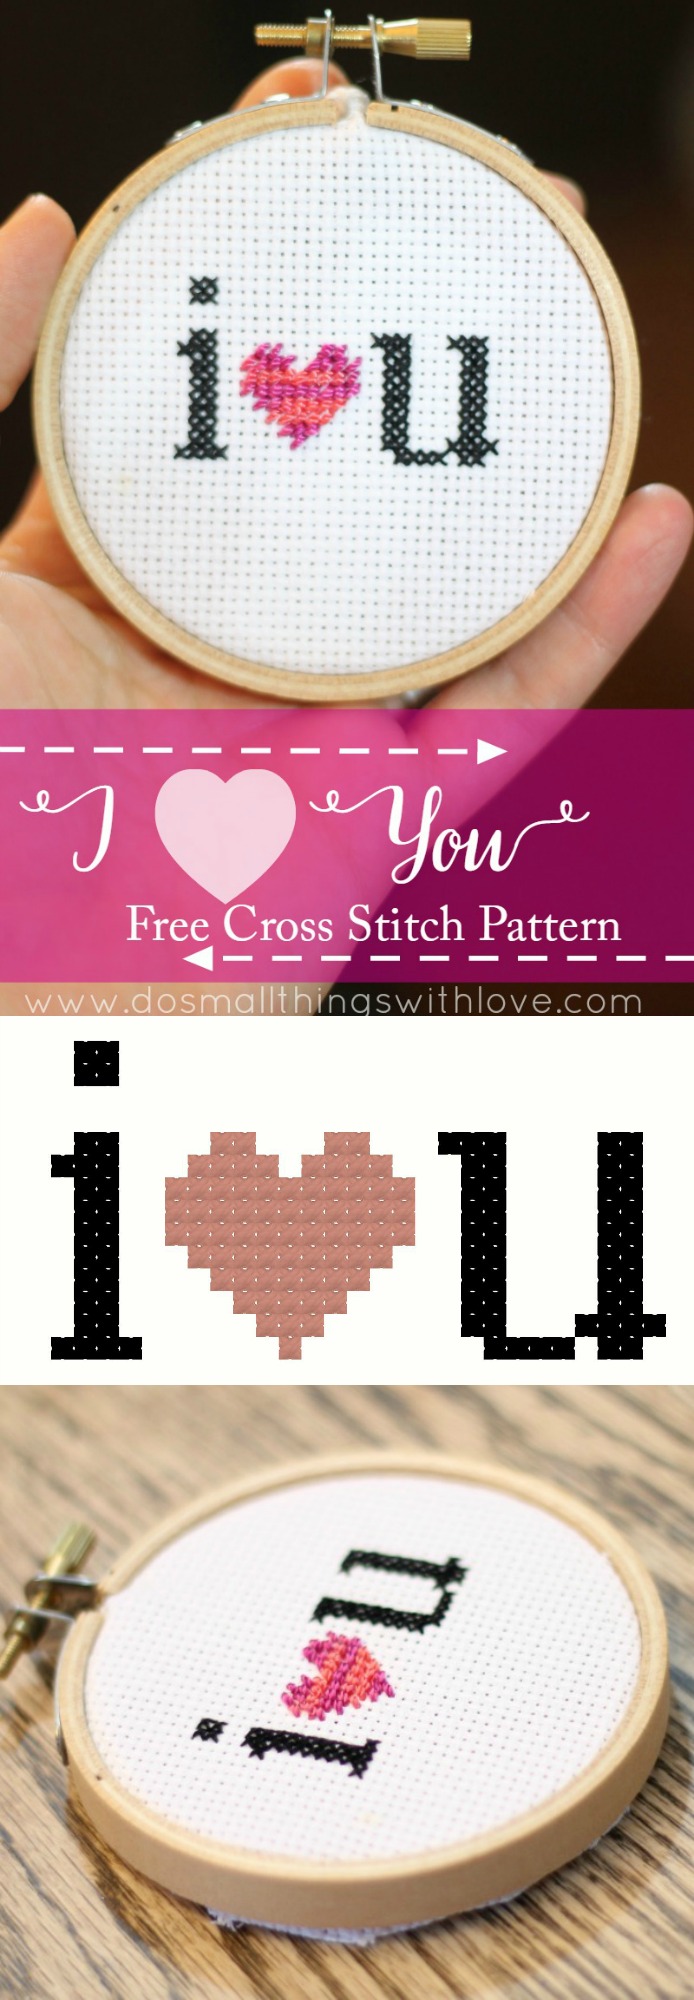 I heart you free cross stitch pattern for Valentines Day!